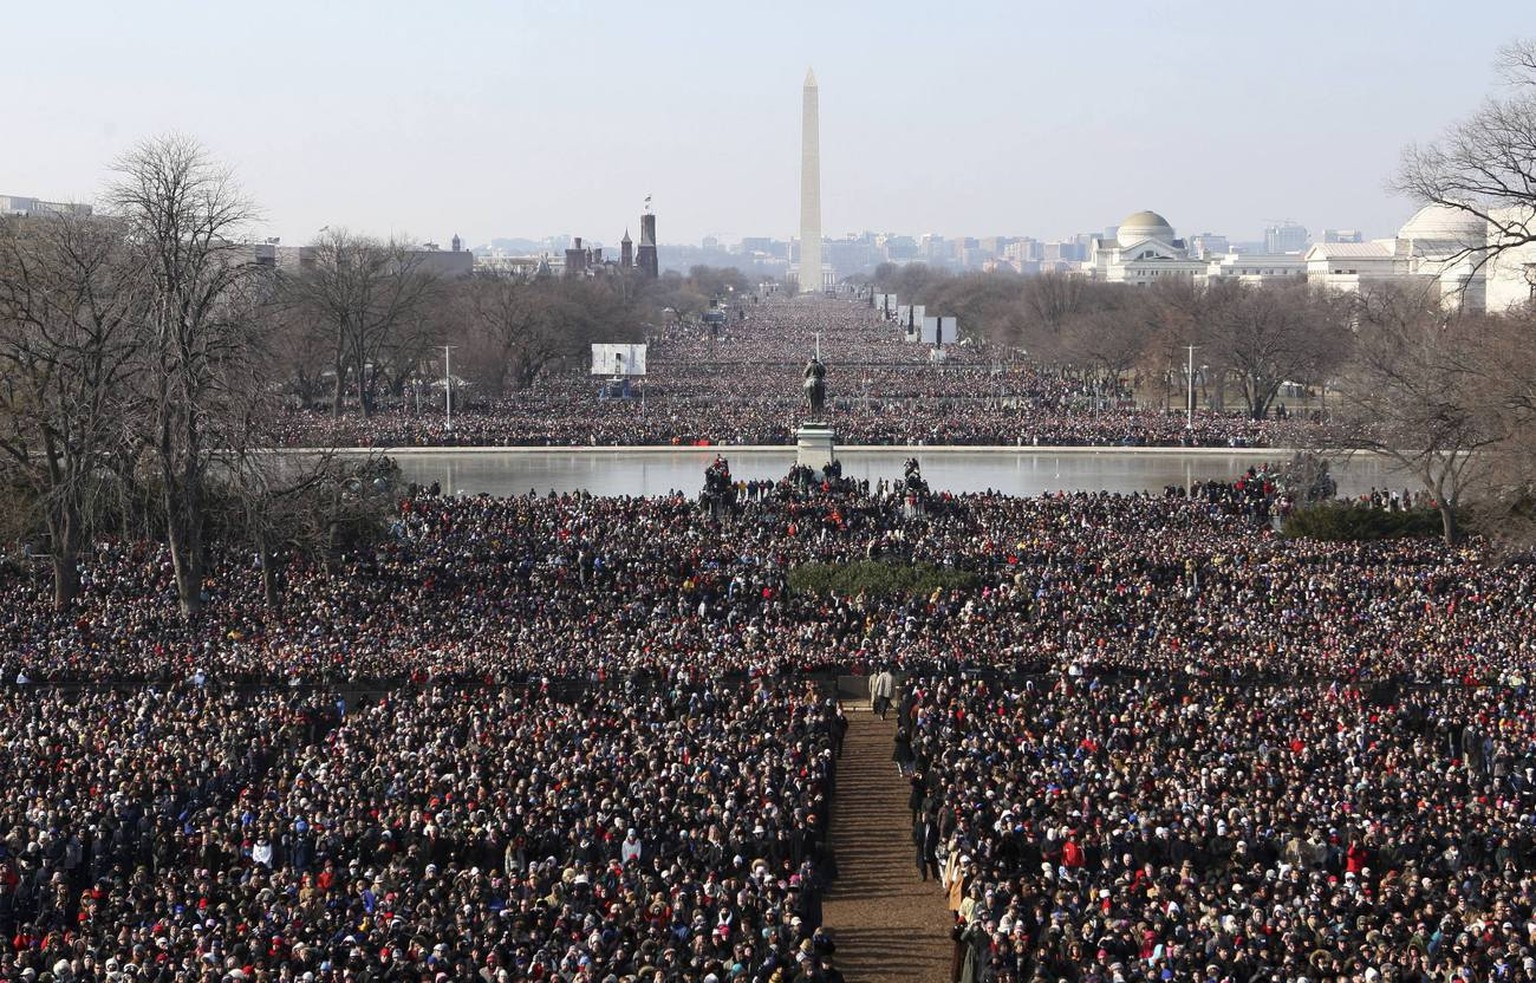 Crowds gather to watch the inauguration of President Barack Obama Tuesday, Jan. 20, 2009, on the west side of the Capitol in Washington. The Washington Monument can be seen in the background. (AP Phot ...